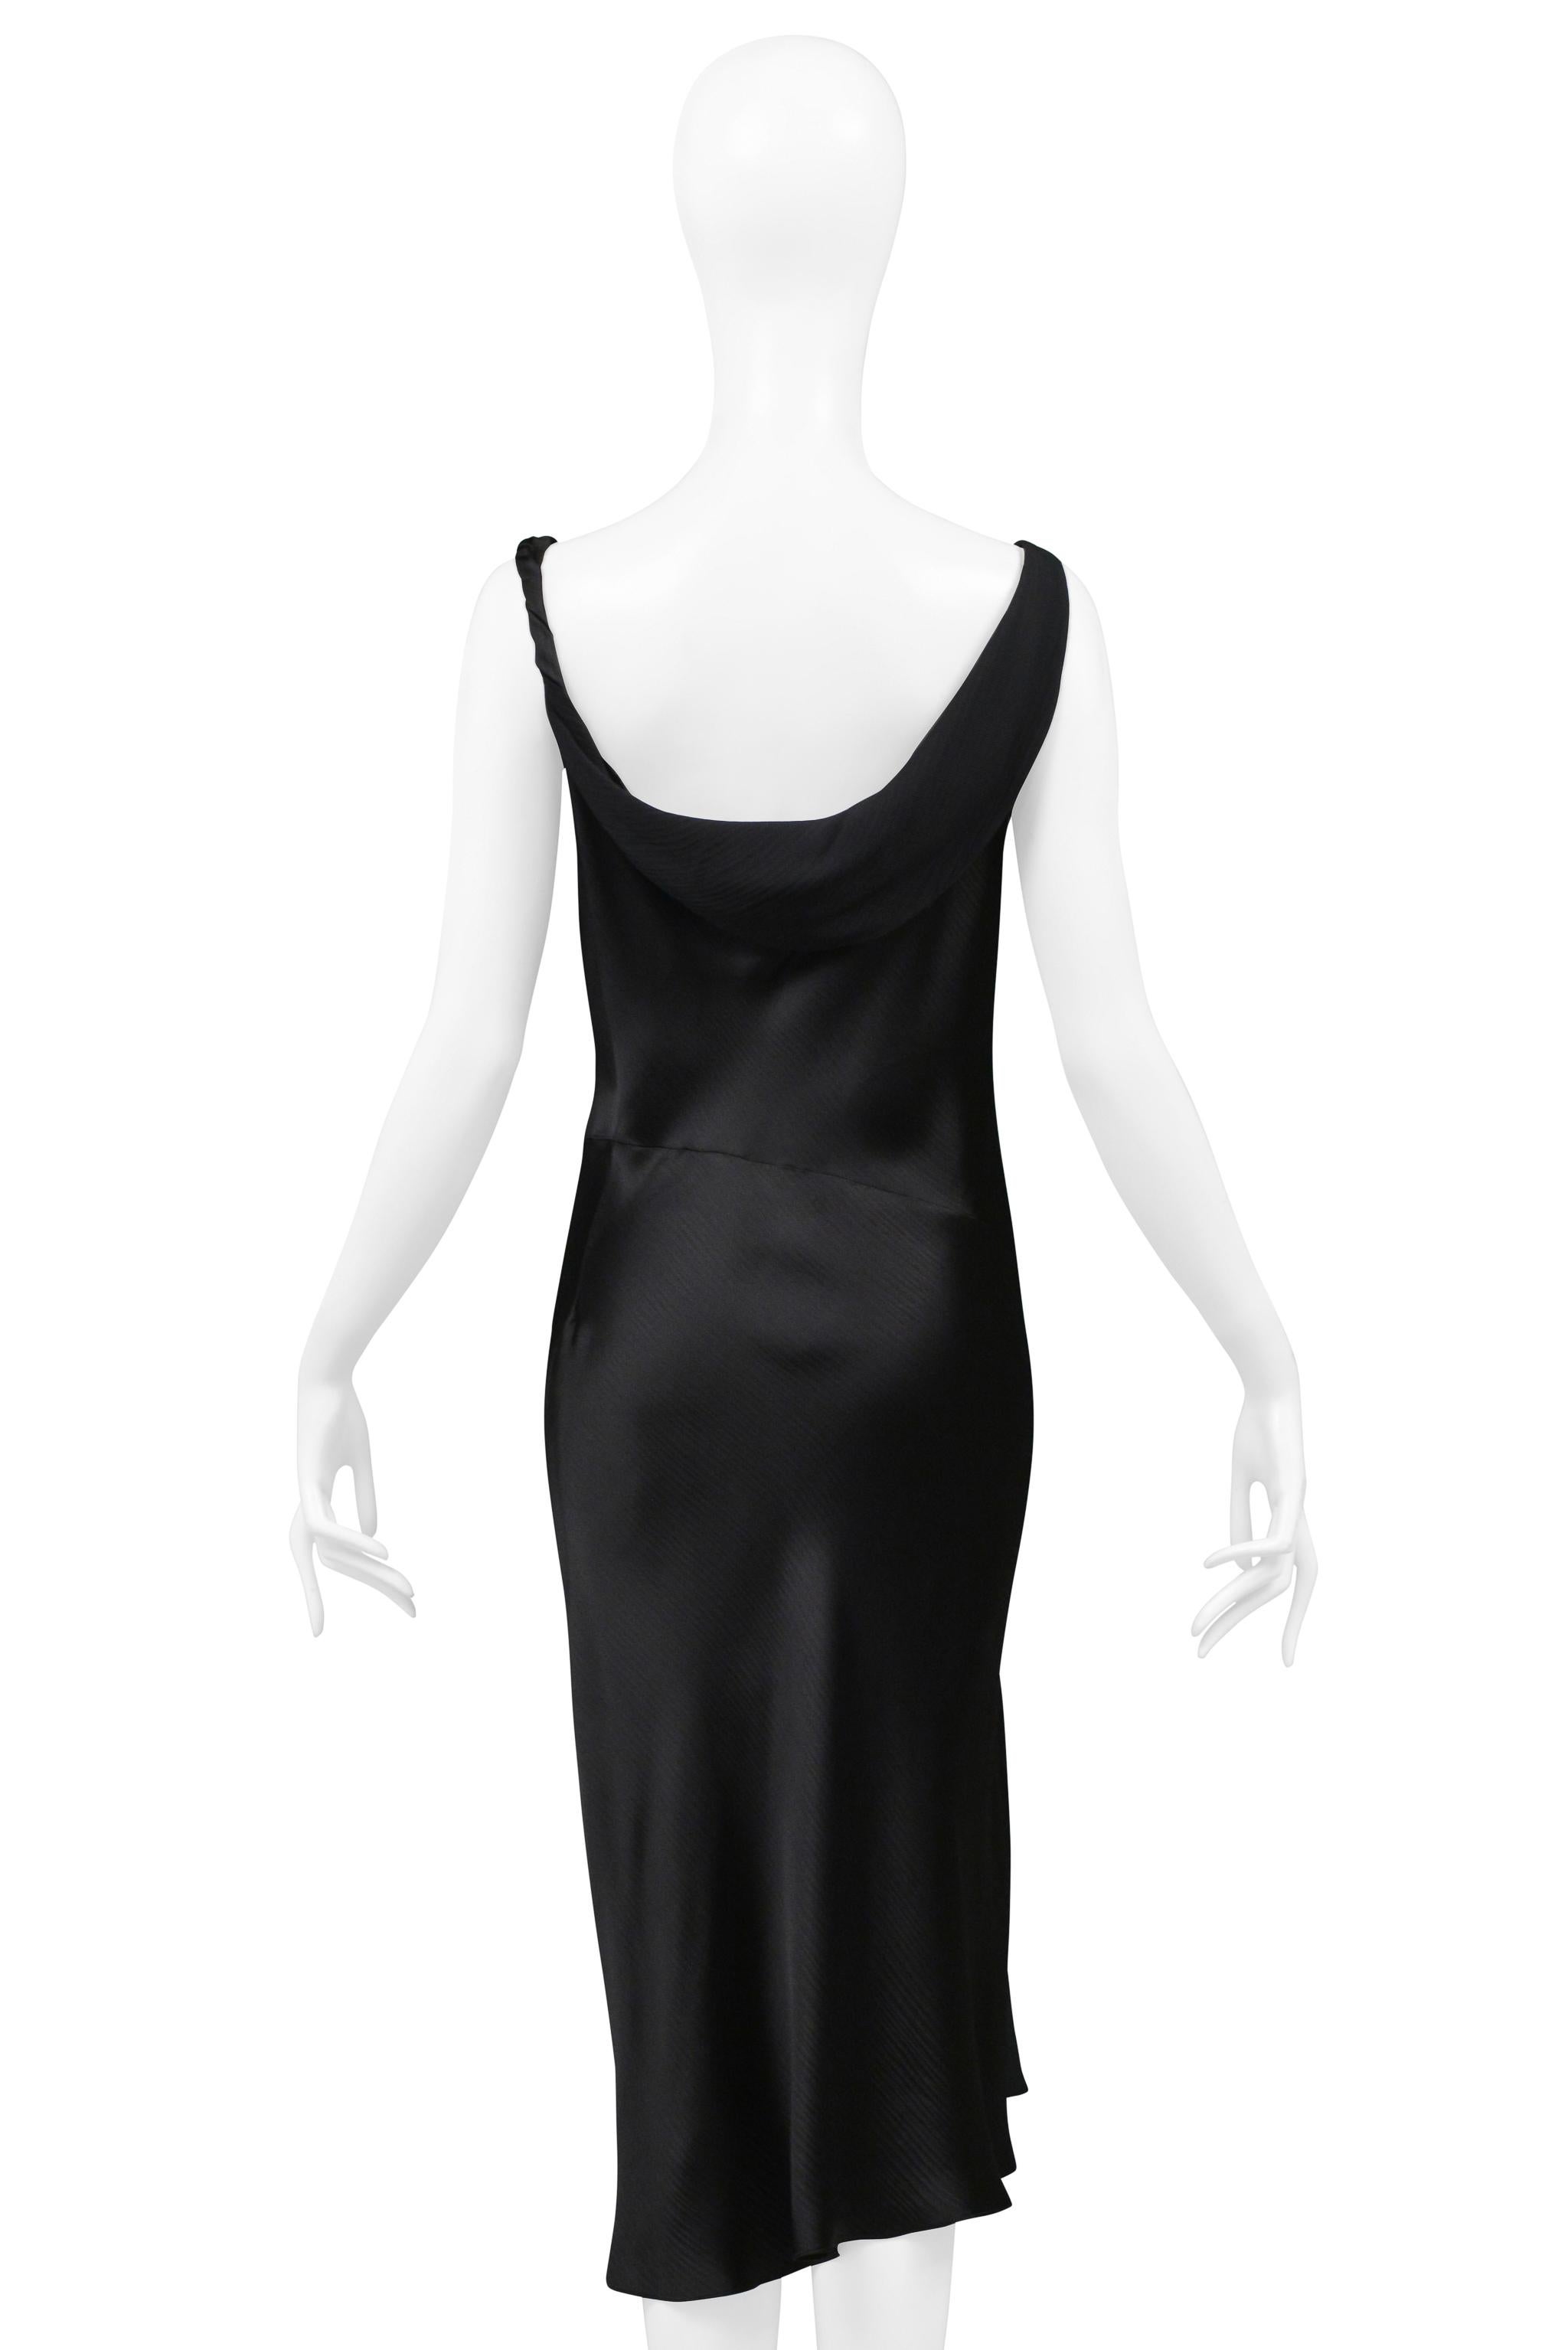 Stunning John Galliano Black Satin Slip Dress with Hip Knot and Slit 1990s For Sale 3